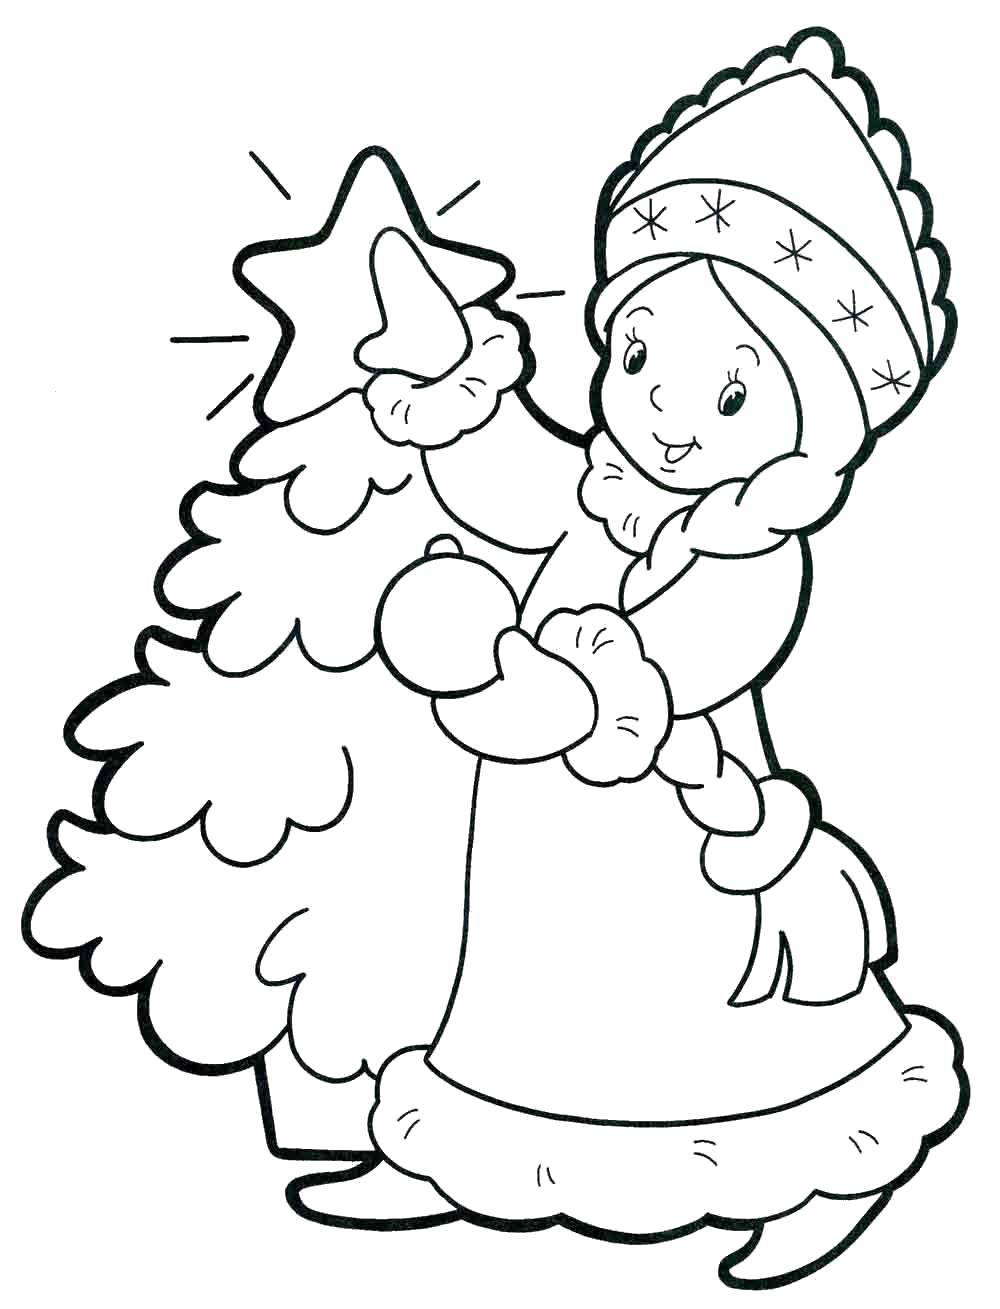 Coloring Snow maiden decorates the Christmas tree. Category maiden. Tags:  Snow maiden, winter, New Year.